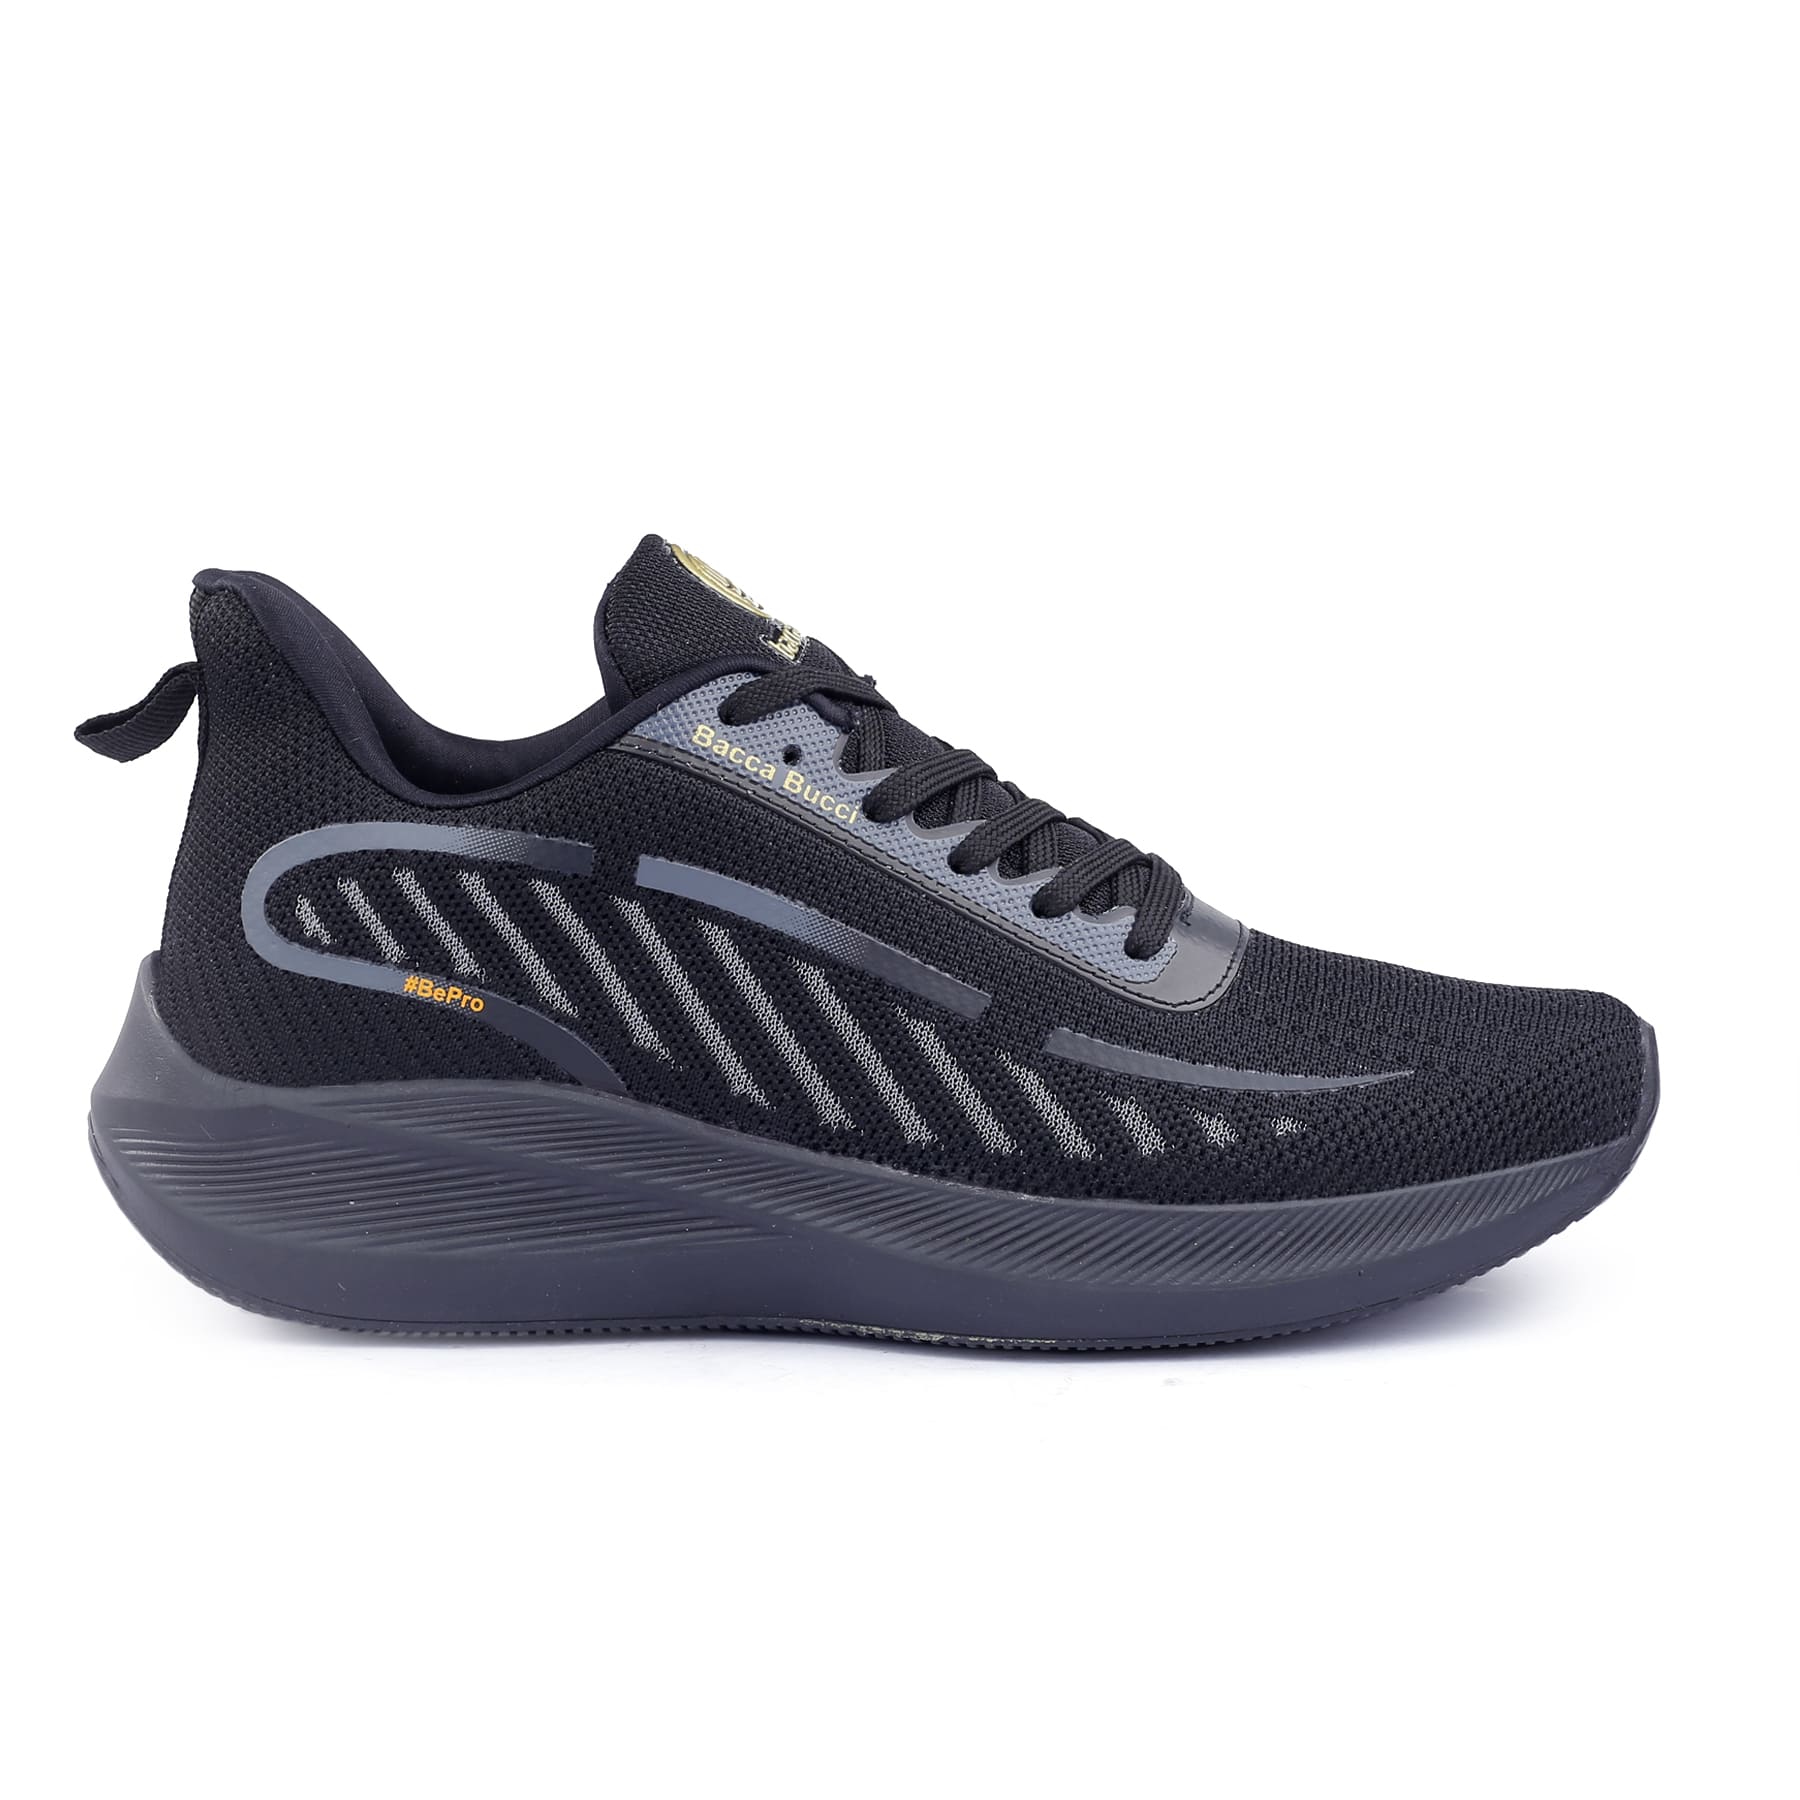 Bacca Bucci IRONMAN Running/Walking/Training Shoe with High Abrasion Rubber Outsole with Molded EVA Sockliner